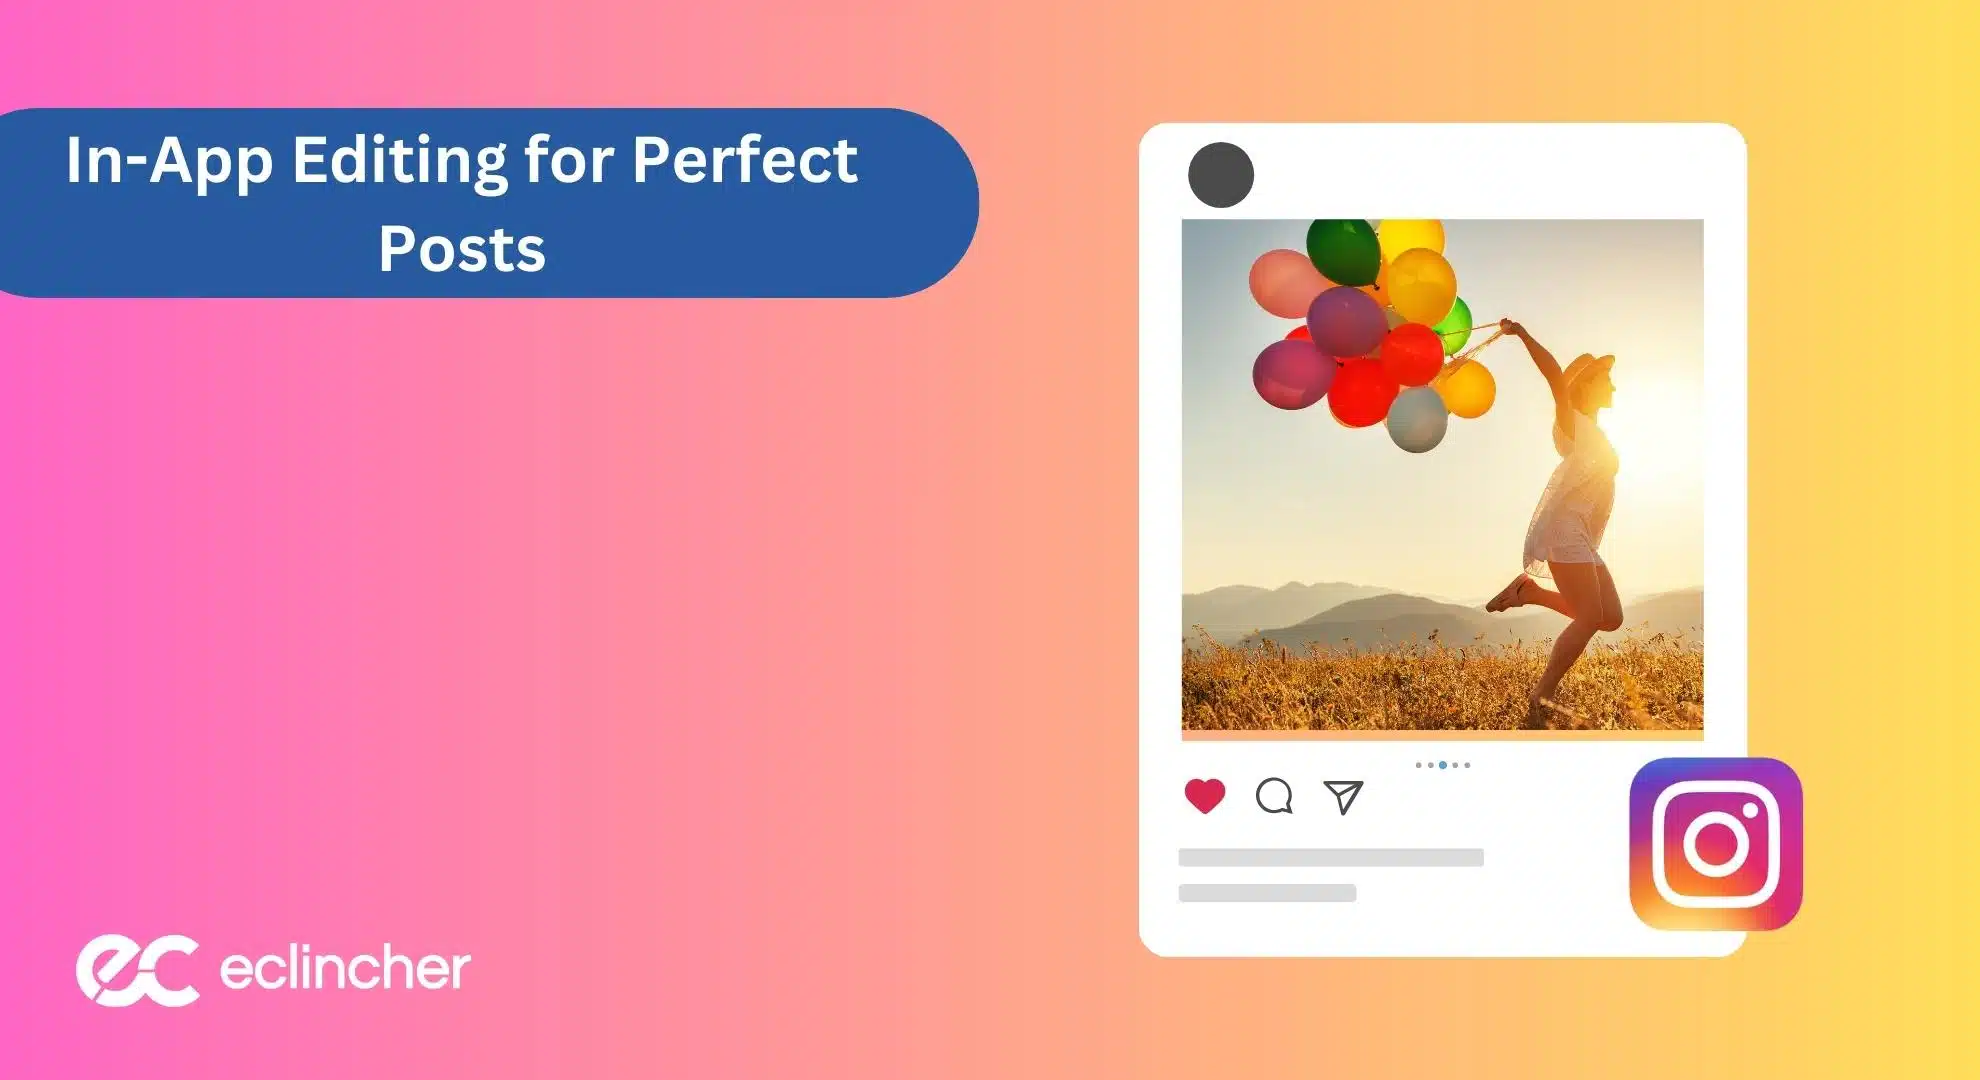 In-App Editing for Perfect Posts